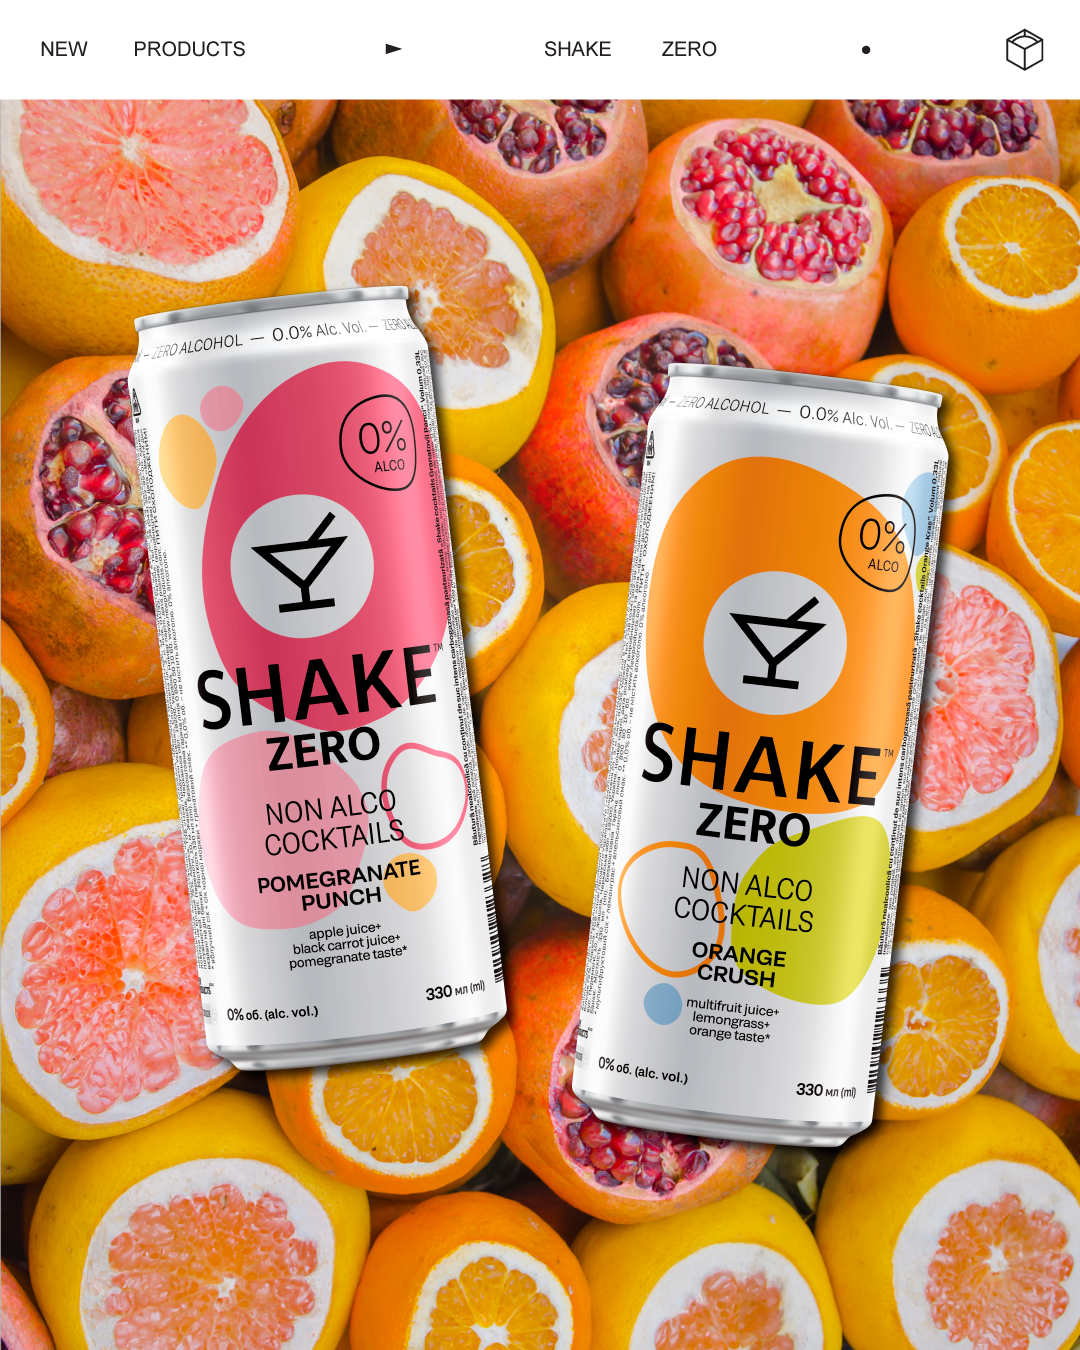 The SHAKE ZERO line expanded to two new cool products at a go